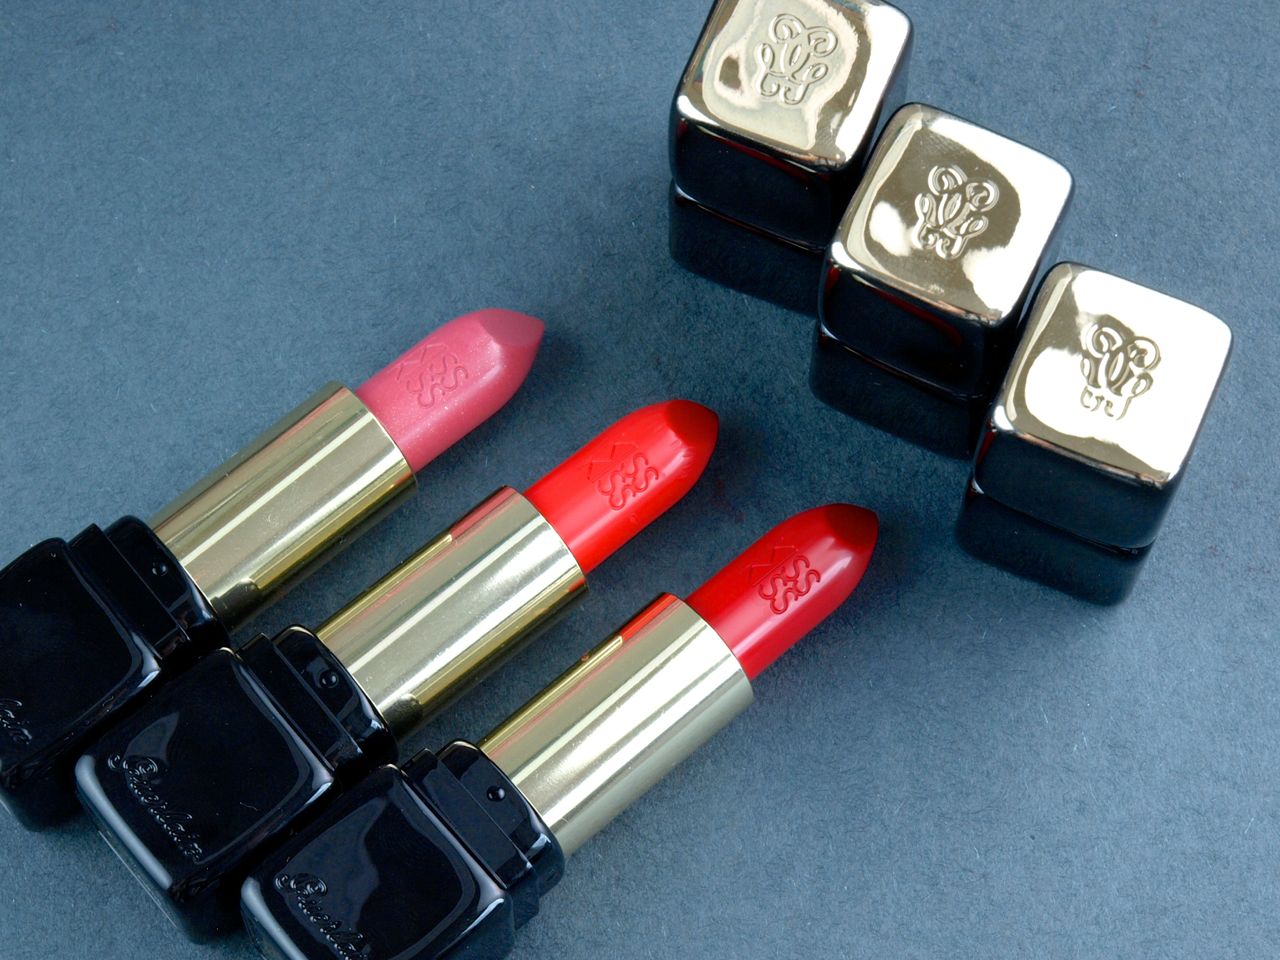 Guerlain KissKiss Shaping Cream Lip Color: Review and Swatches